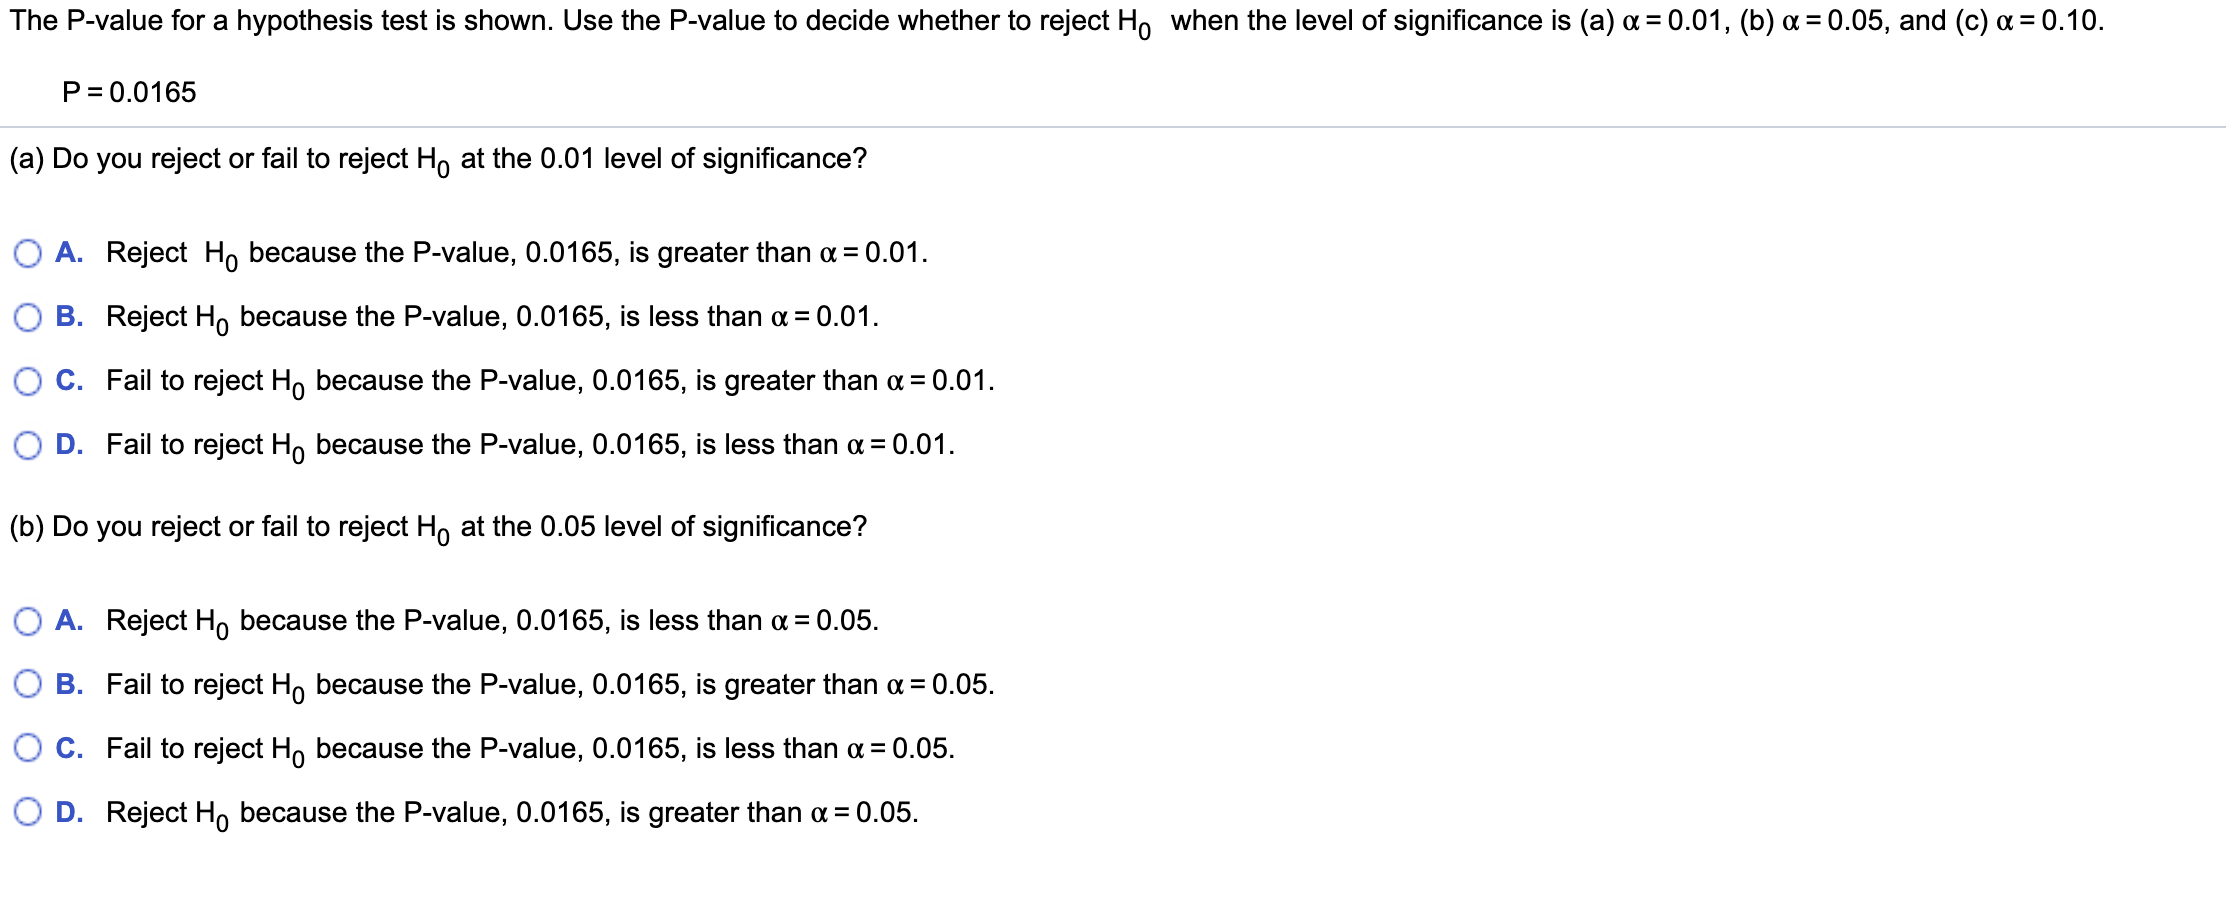 The P-value for a hypothesis test is shown. Use the P-value to decide whether to reject H, when the level of significance is (a) a = 0.01, (b) a = 0.05, and (c) a = 0.10.
%3D
P= 0.0165
(a) Do you reject or fail to reject H, at the 0.01 level of significance?
O A. Reject H, because the P-value, 0.0165, is greater than a = 0.01.
O B. Reject H, because the P-value, 0.0165, is less than a= 0.01.
%3D
O C. Fail to reject H, because the P-value, 0.0165, is greater than a = 0.01.
O D. Fail to reject H, because the P-value, 0.0165, is less than a = 0.01.
(b) Do you reject or fail to reject H, at the 0.05 level of significance?
O A. Reject H, because the P-value, 0.0165, is less than a = 0.05.
O B. Fail to reject H, because the P-value, 0.0165, is greater than a = 0.05.
Oc. Fail to reject H, because the P-value, 0.0165, is less than a = 0.05.
O D. Reject H, because the P-value, 0.0165, is greater than a = 0.05.
